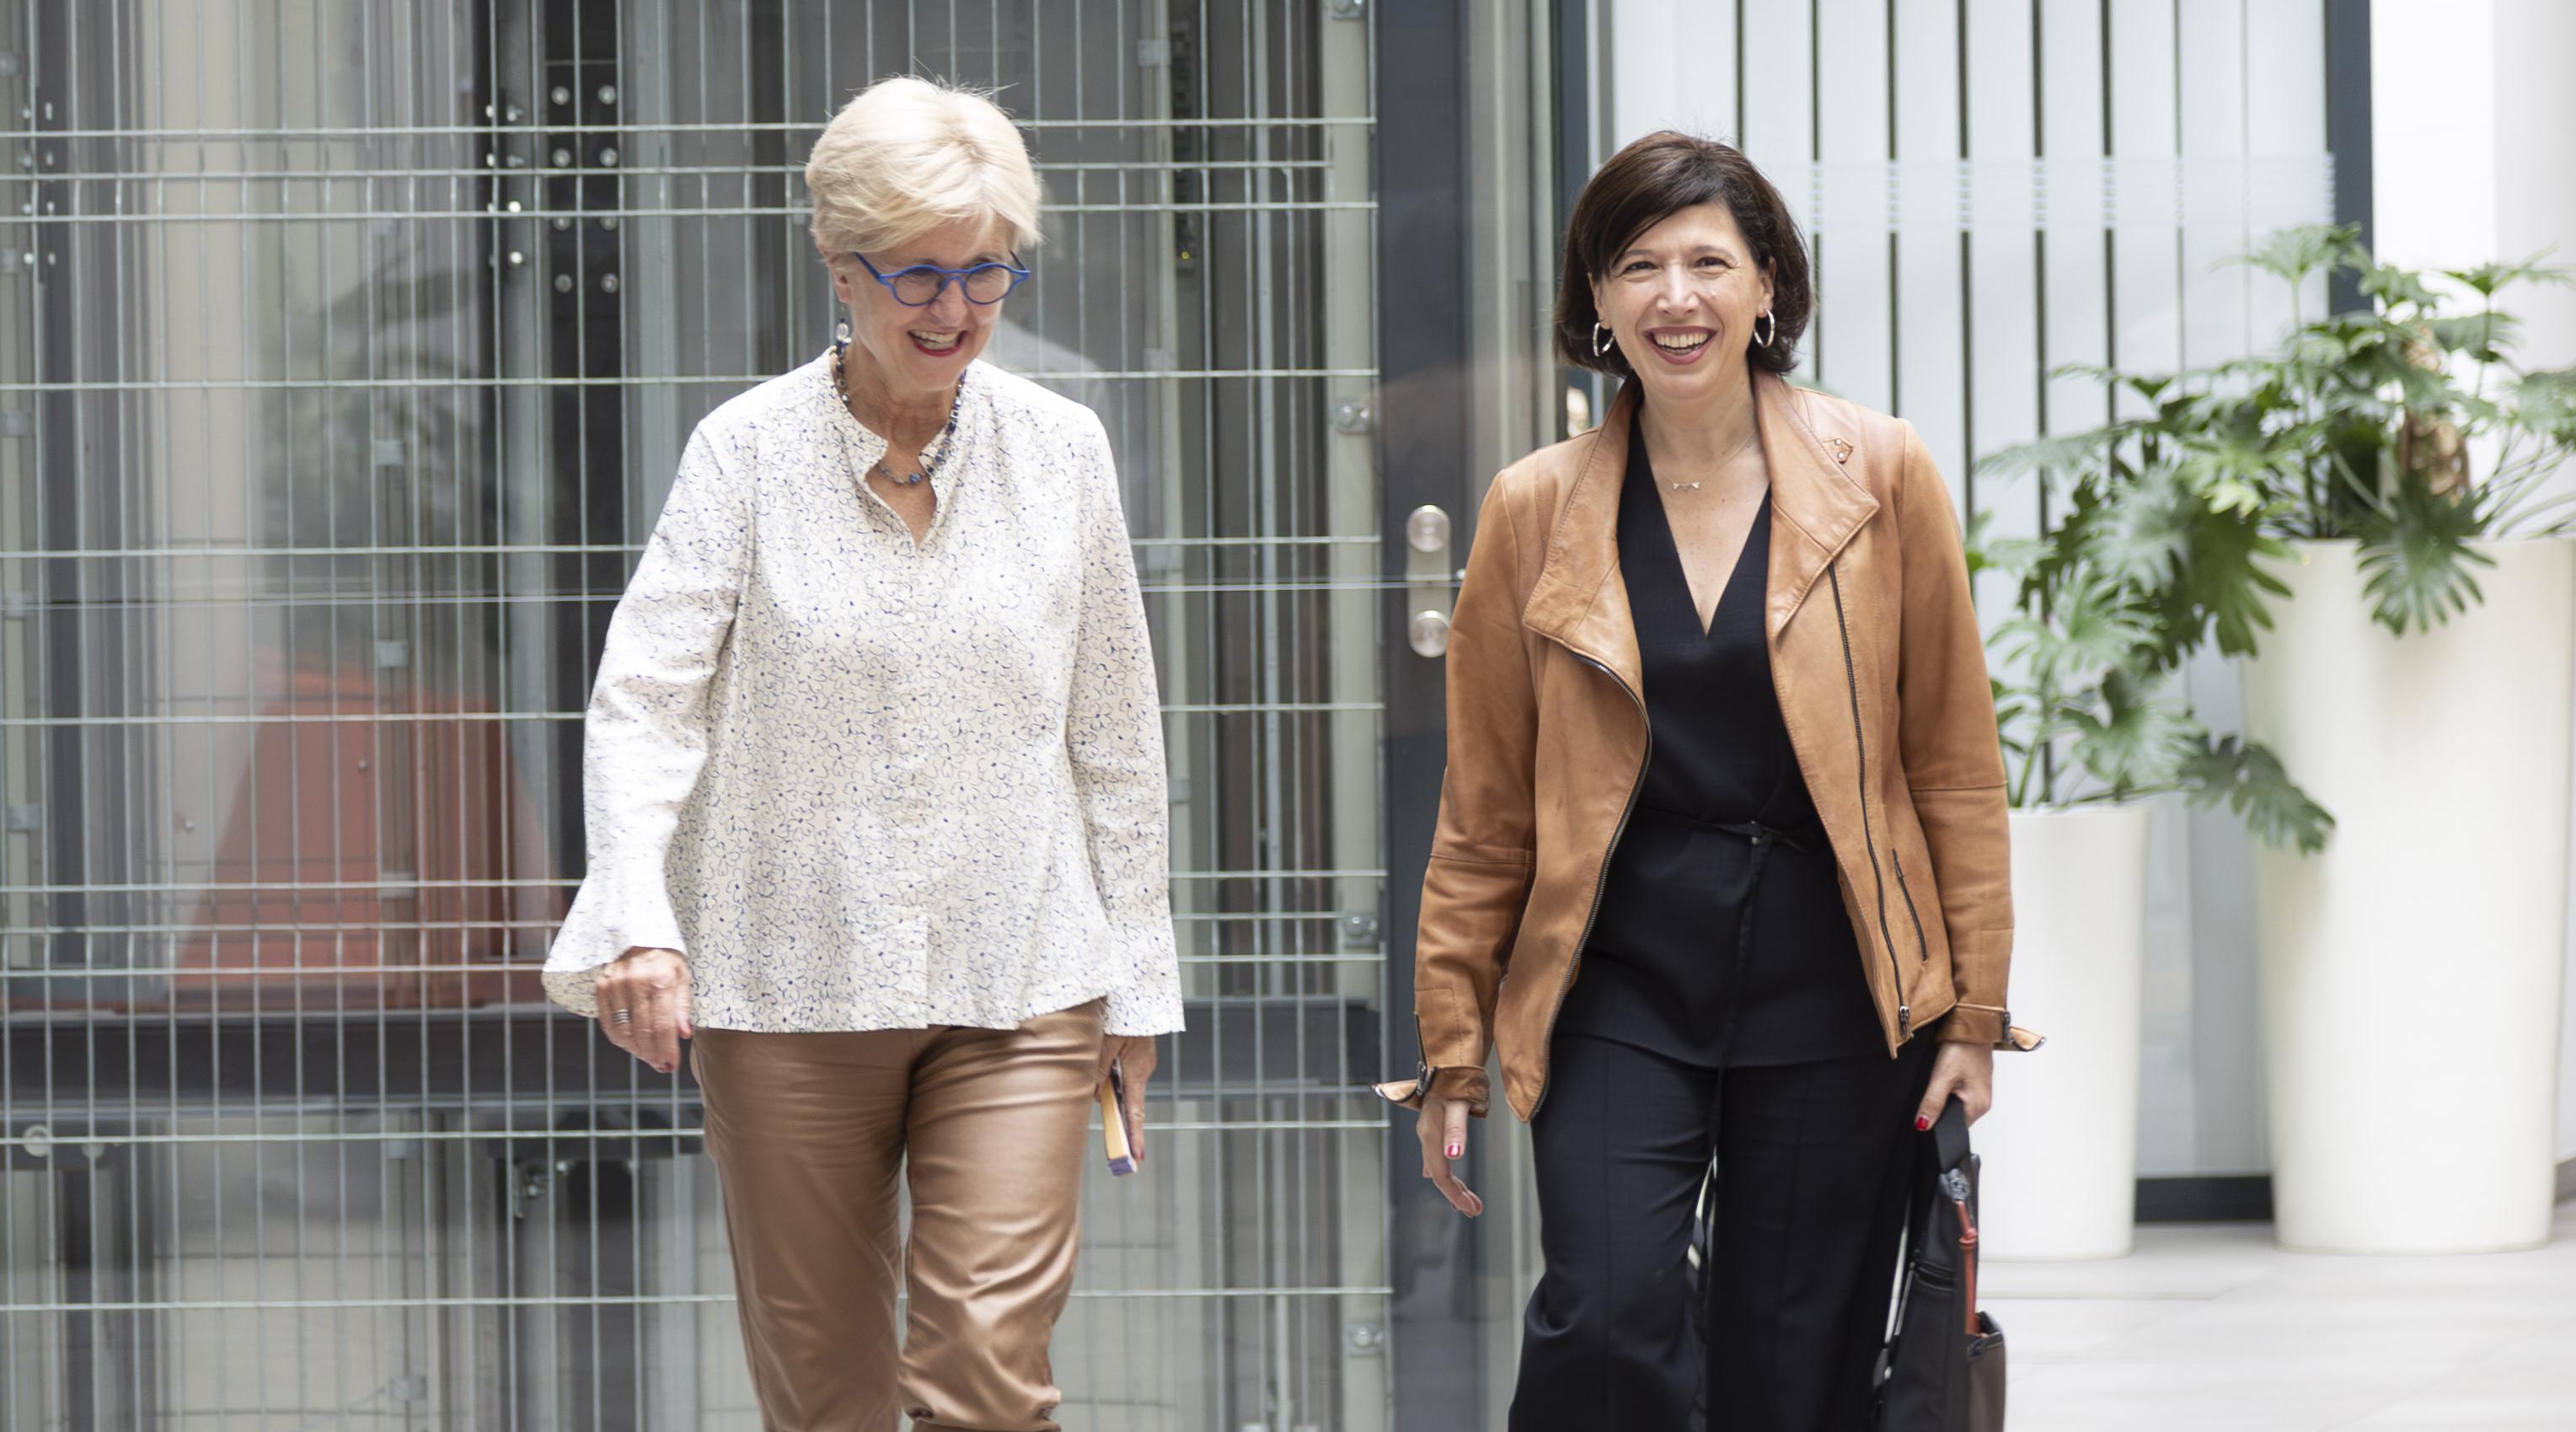 EIGE Director Carlien Scheele (left) and Director General Ana Gallego of Justice and Consumers (right) walking together outside